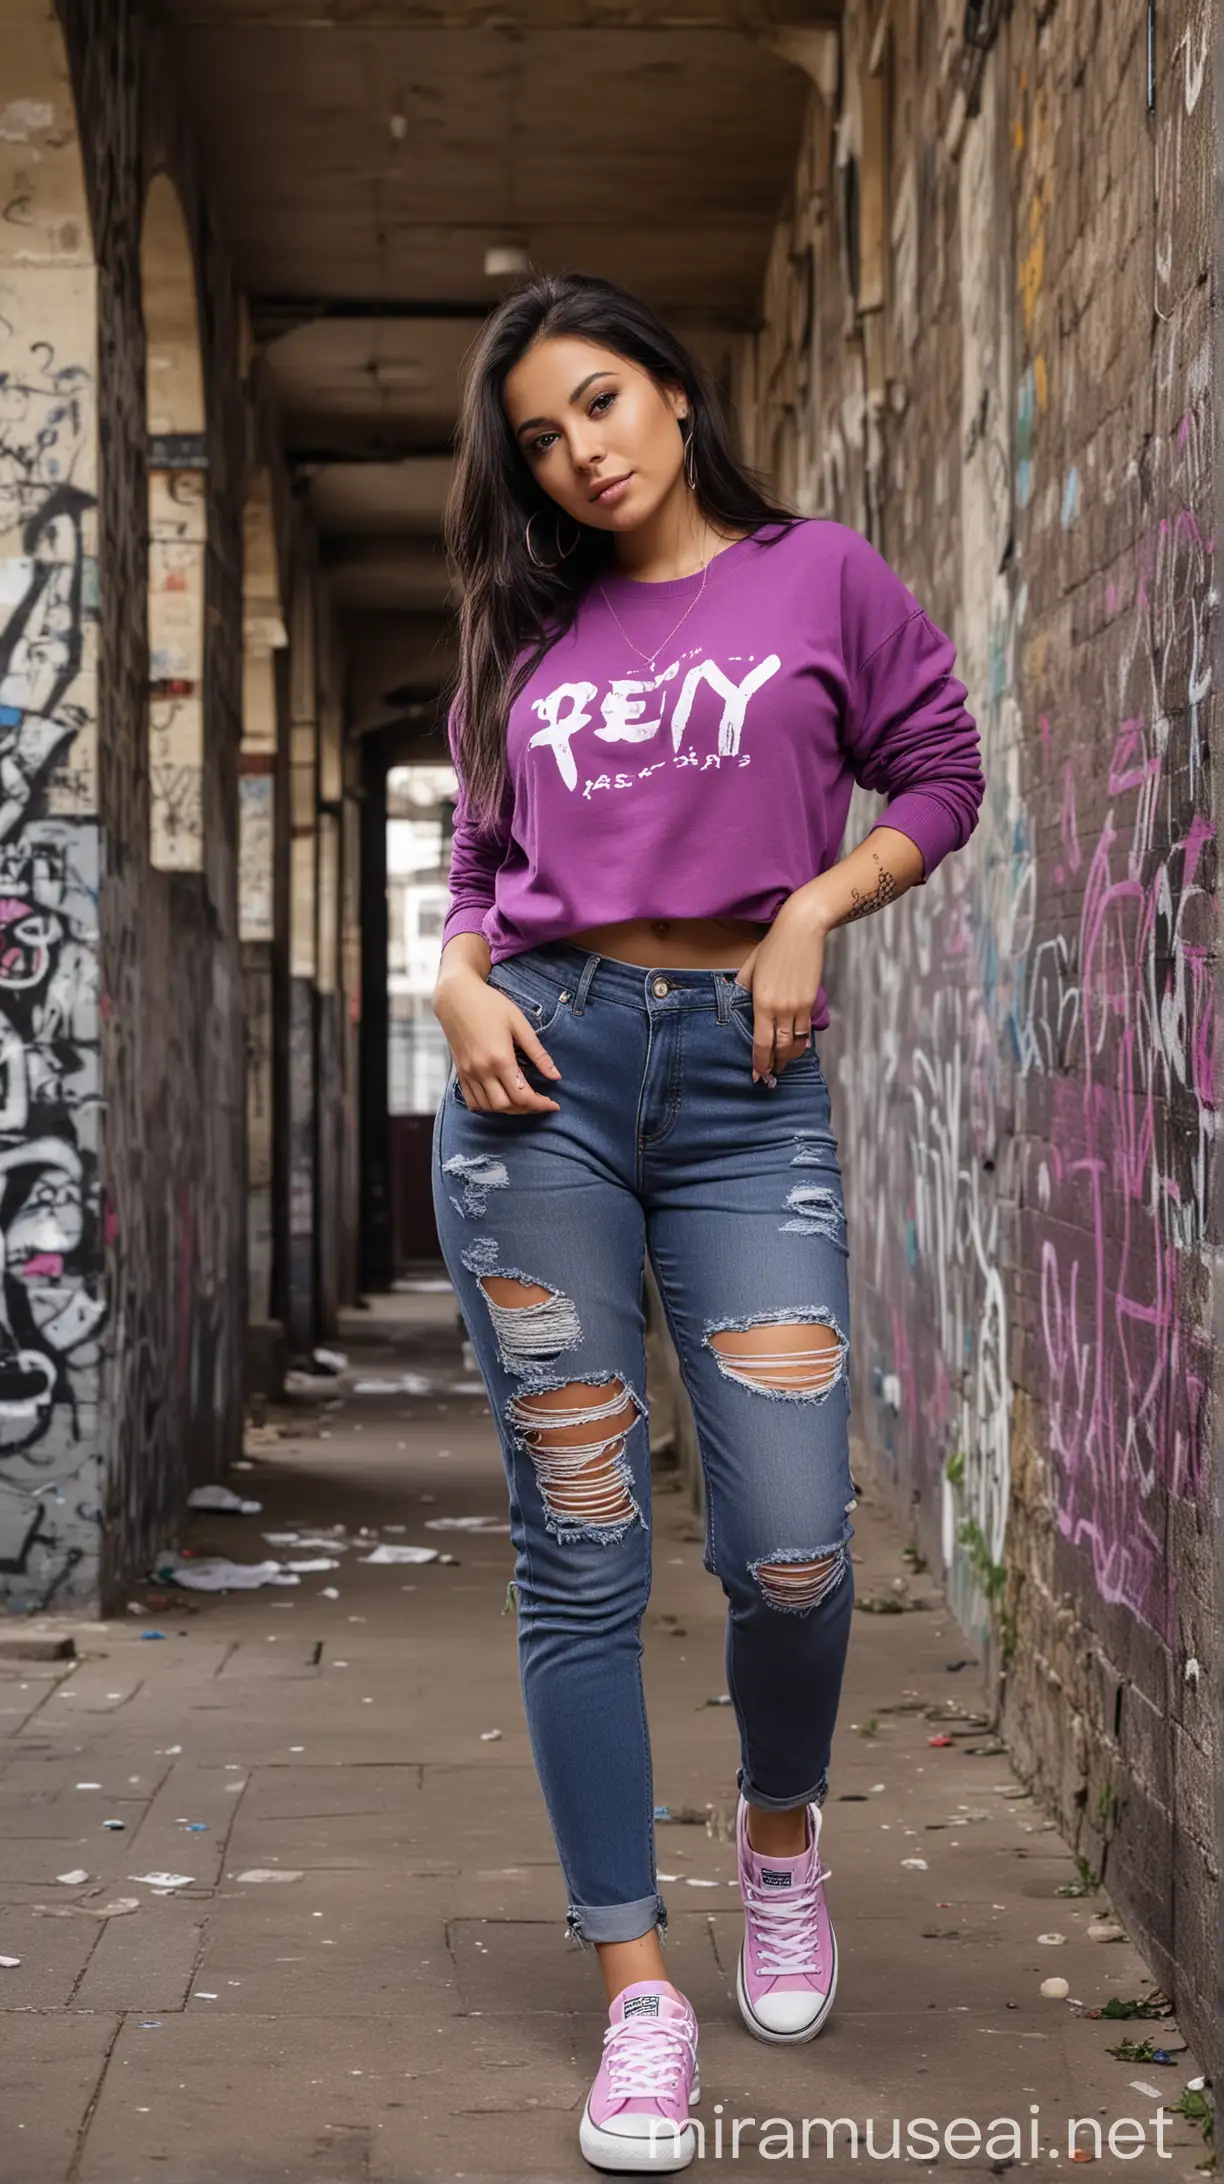 photography of a very beautiful woman, 25 years old, black long style hair, sharp gaze in front of the camera, wearing a purple swetear, with the word 'REY' written on it, with tight ripped black jeans, wearing pink converse shoes, standing with her hands in her trouser pockets, standing in the hallway under the bridge, full of graffiti, photo taken by S24 ultra camera, UHD quality, clear, solid colors.